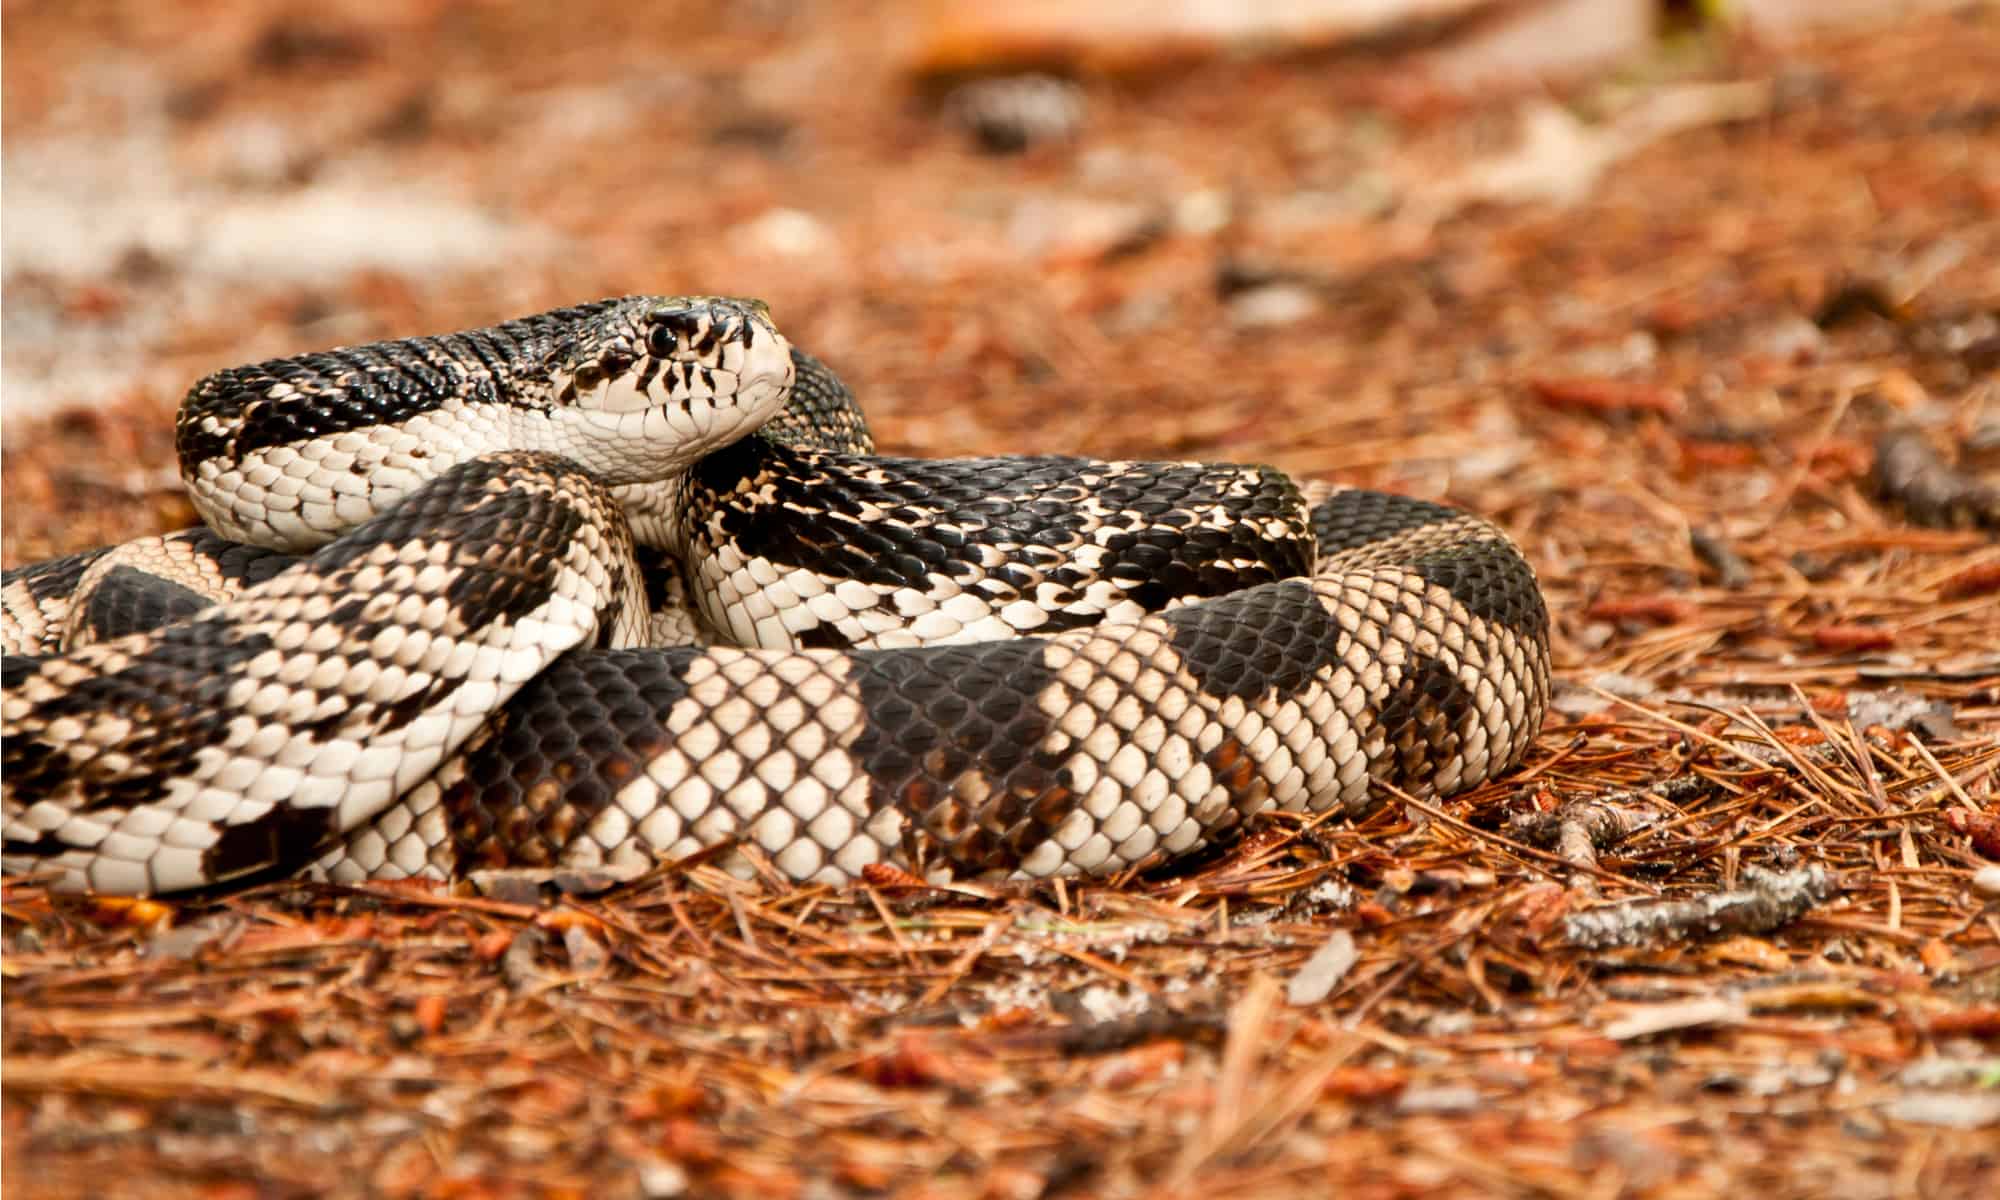 Northern pine snake  Smithsonian's National Zoo and Conservation Biology  Institute